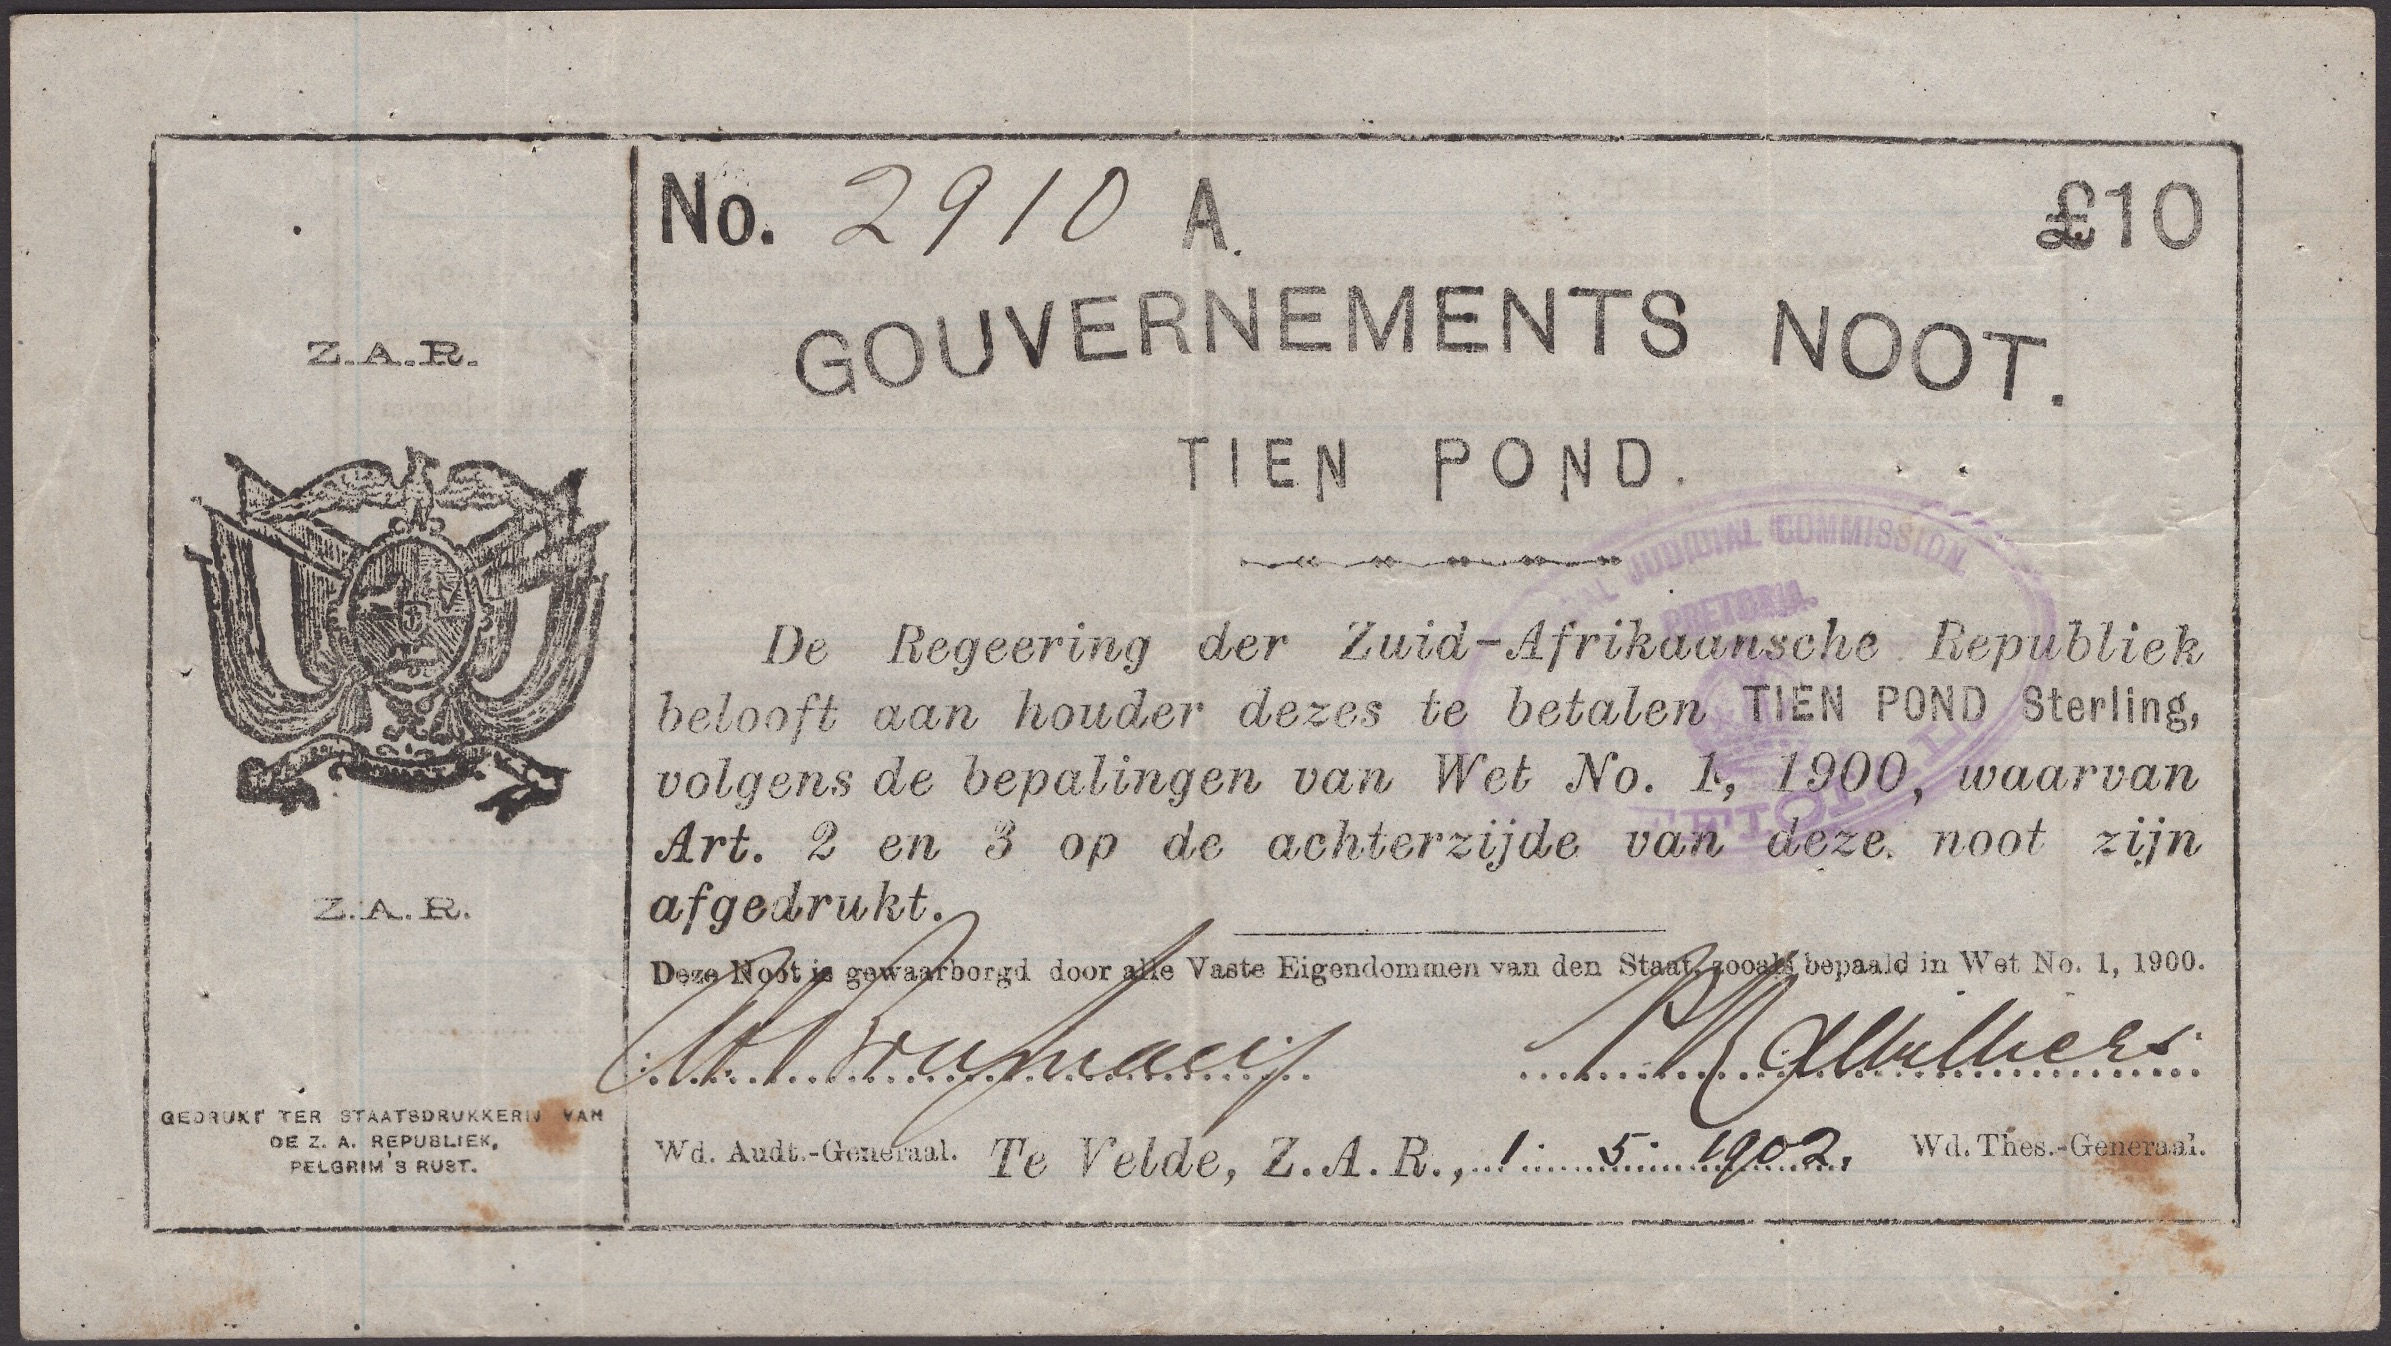 Gouvernements Noots, Â£10, Ta Velde, 1 May 1902, serial number 2910A, purple handstamp at...